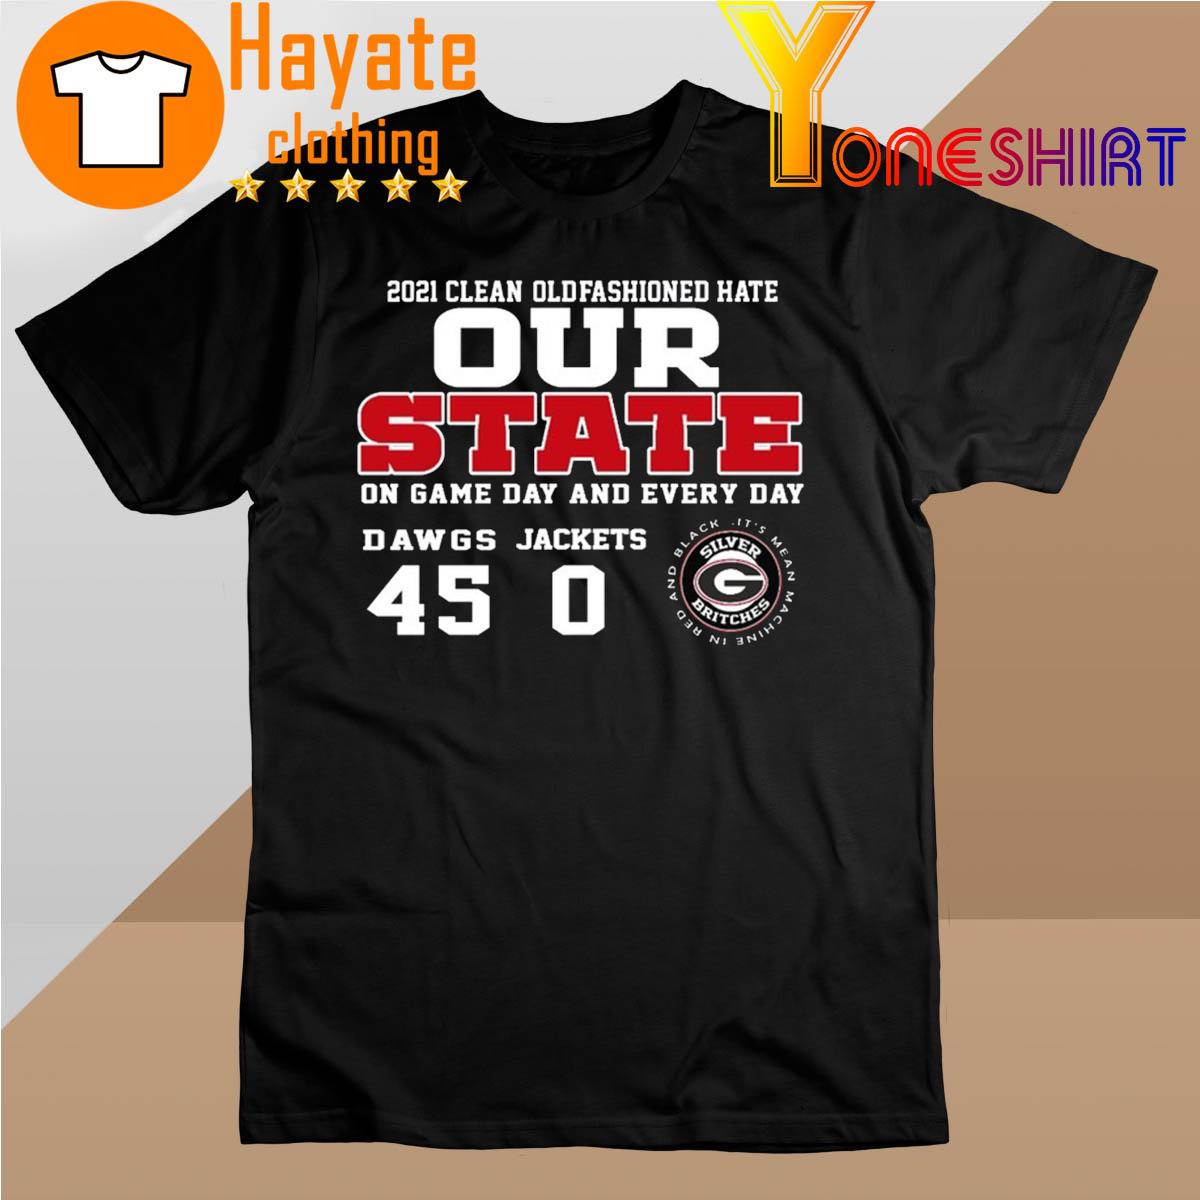 2021 Clean Old Fashioned hate Our State on game day and Every day Dawgs Jackets 45-0 shirt